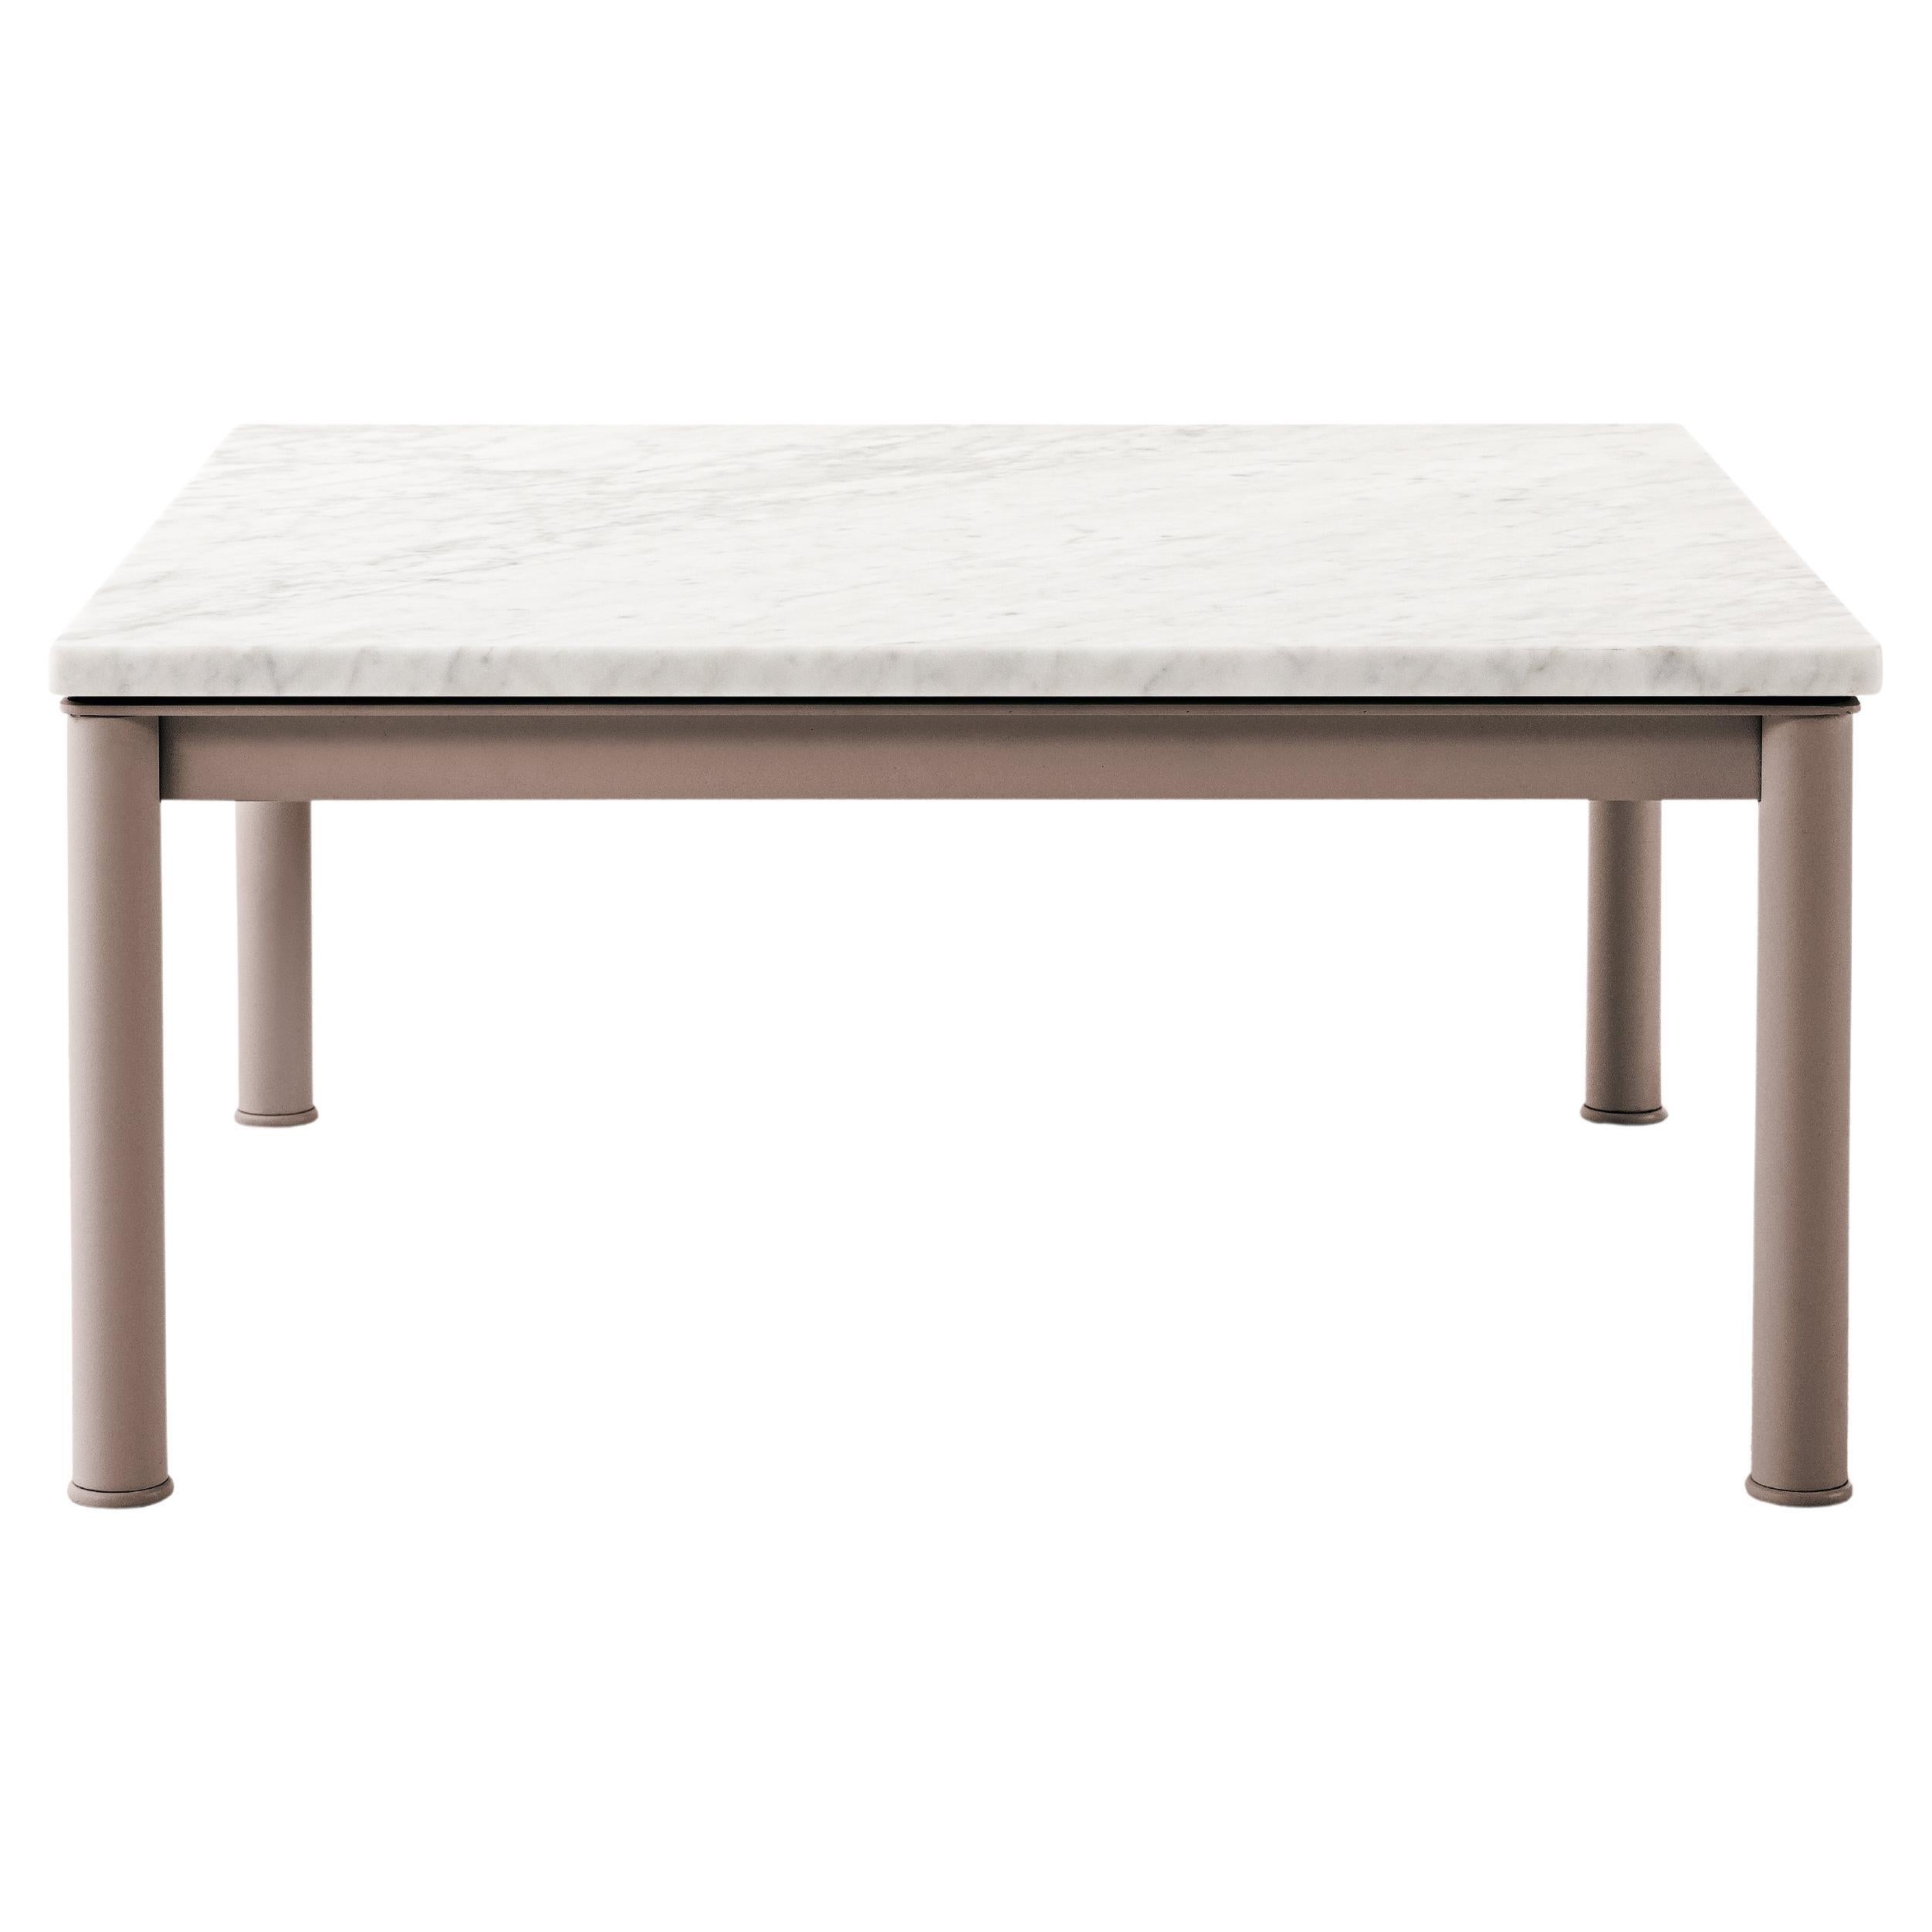 Italian Le Corbusier, Pierre Jeanneret, Charlotte Perriand Lc10 T5 Table by Cassina For Sale